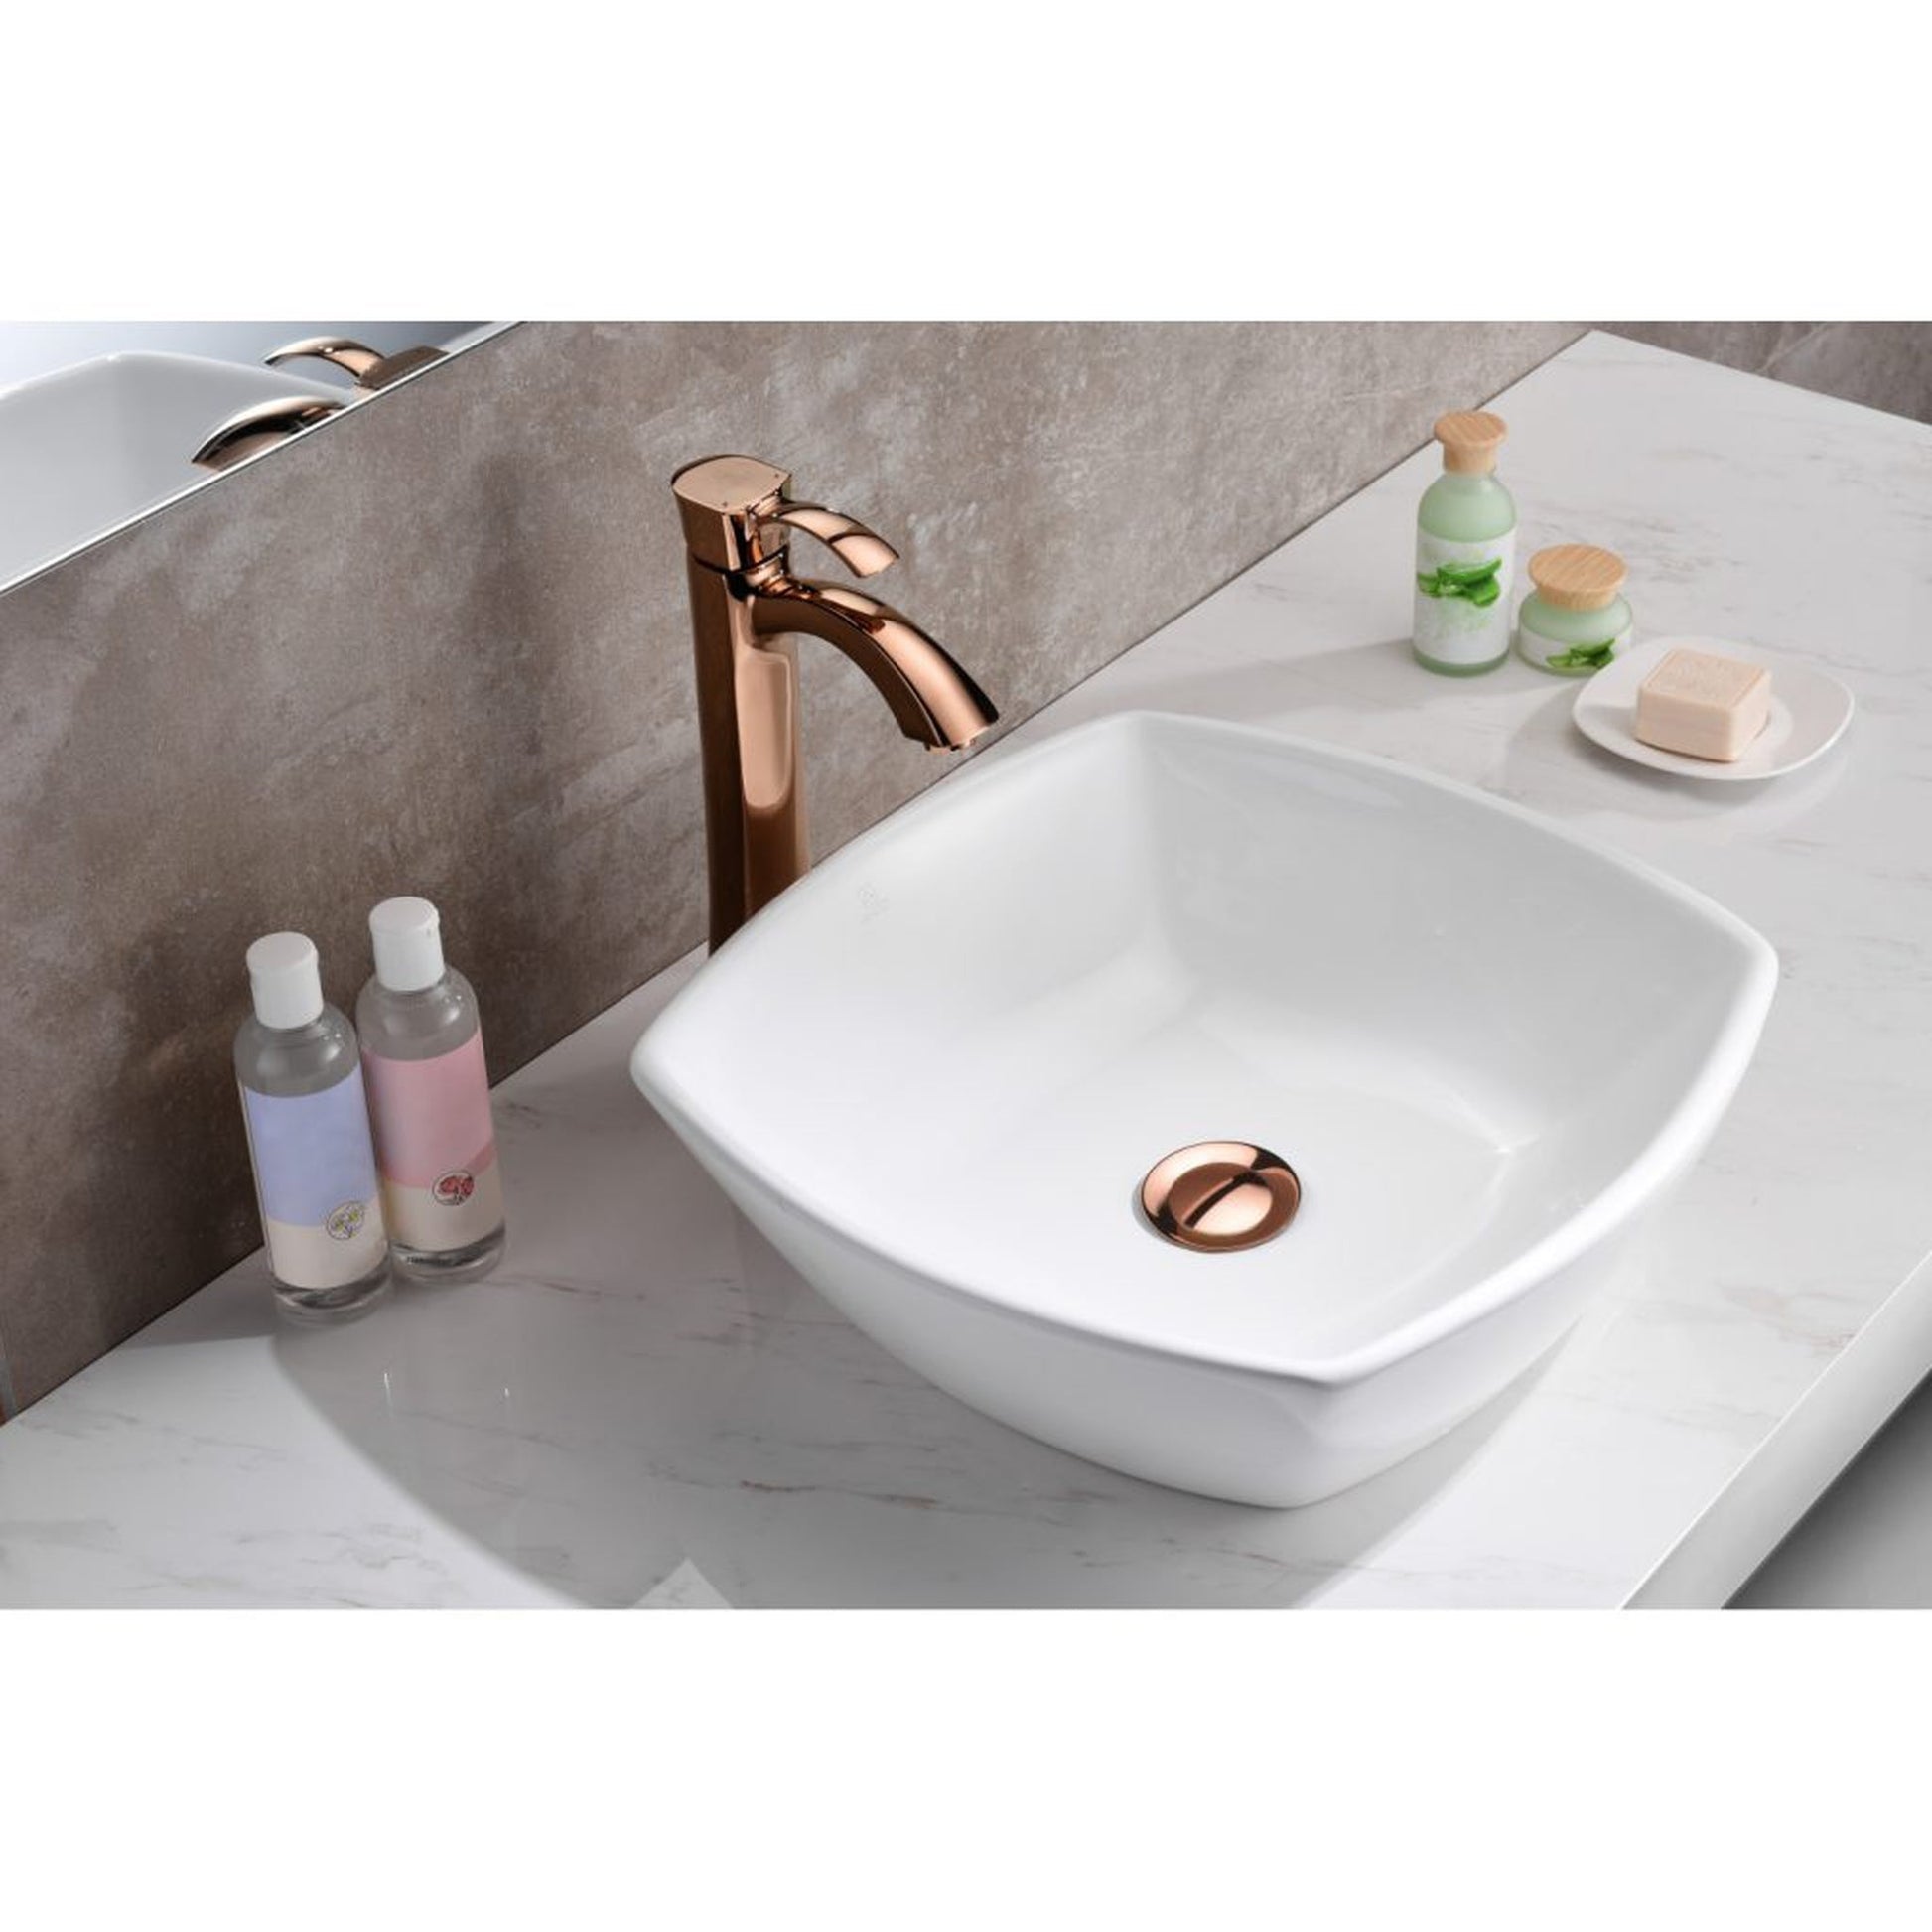 ANZZI Deux Series 17" x 17" Square Shape Glossy White Vessel Sink